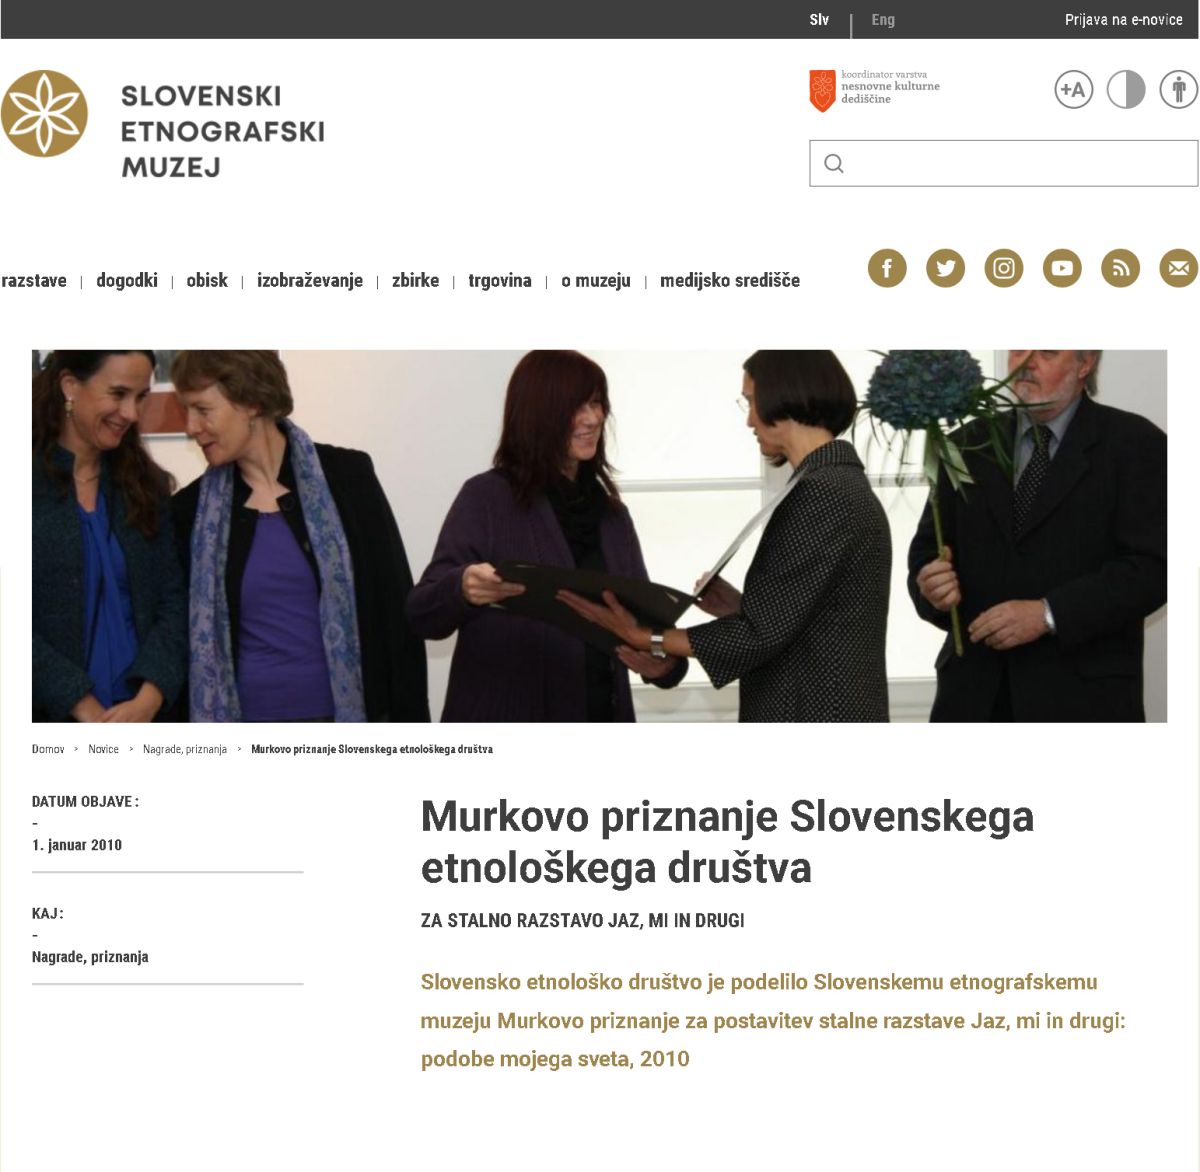 Murkos prize of Slovene Ethnological Society for the permanent exhibition I, We and Others in Slovene Ethnographic Museum, Jan. 2010.